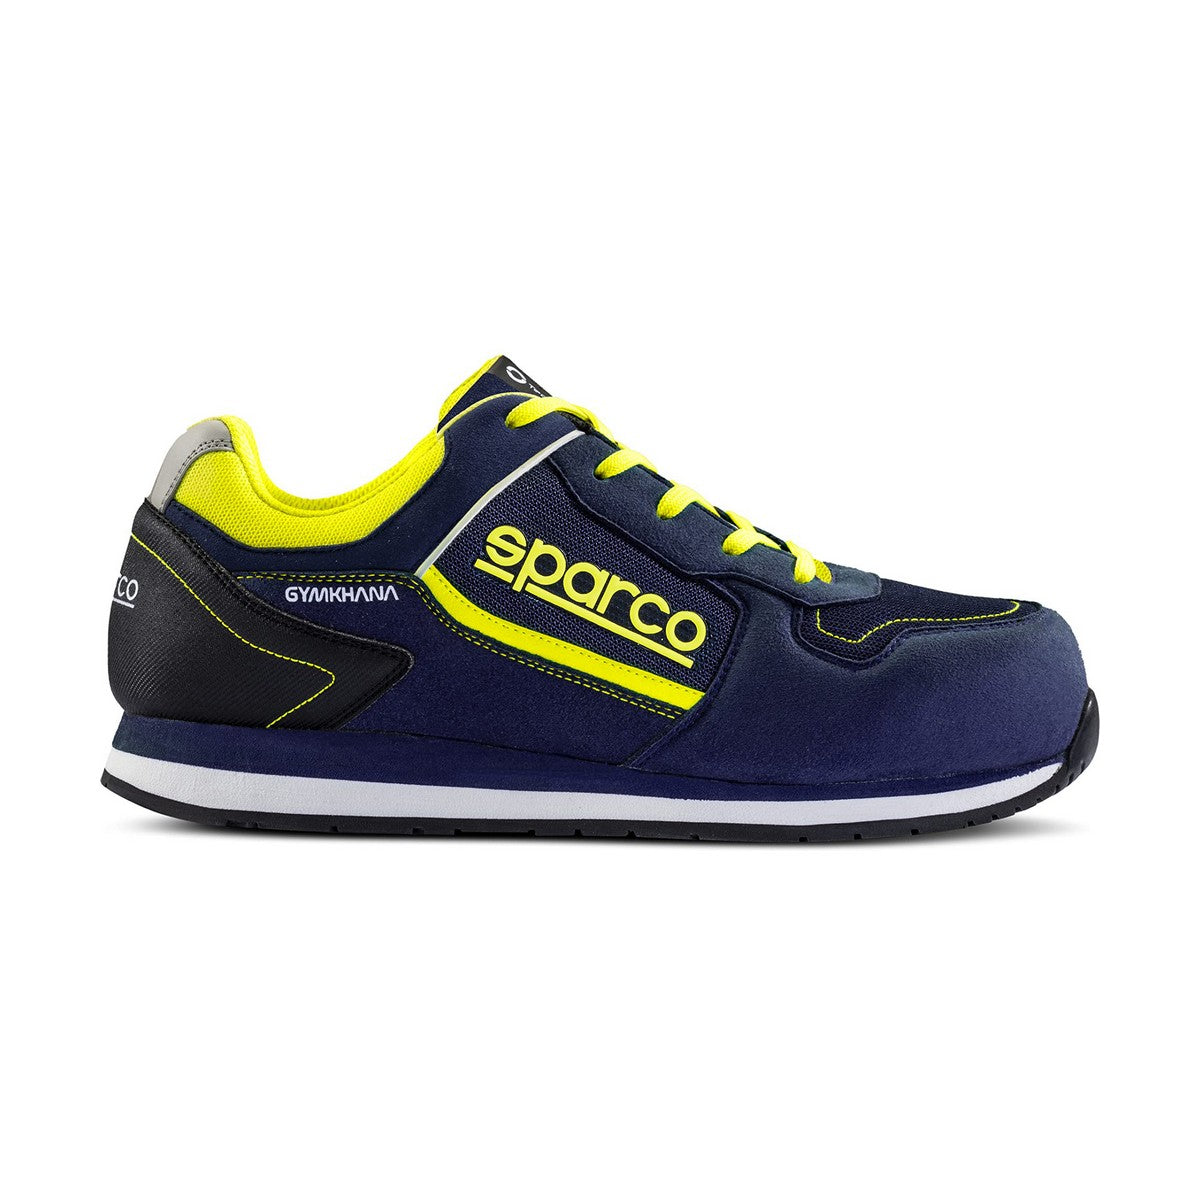 Turnschuhe Sparco 0752740